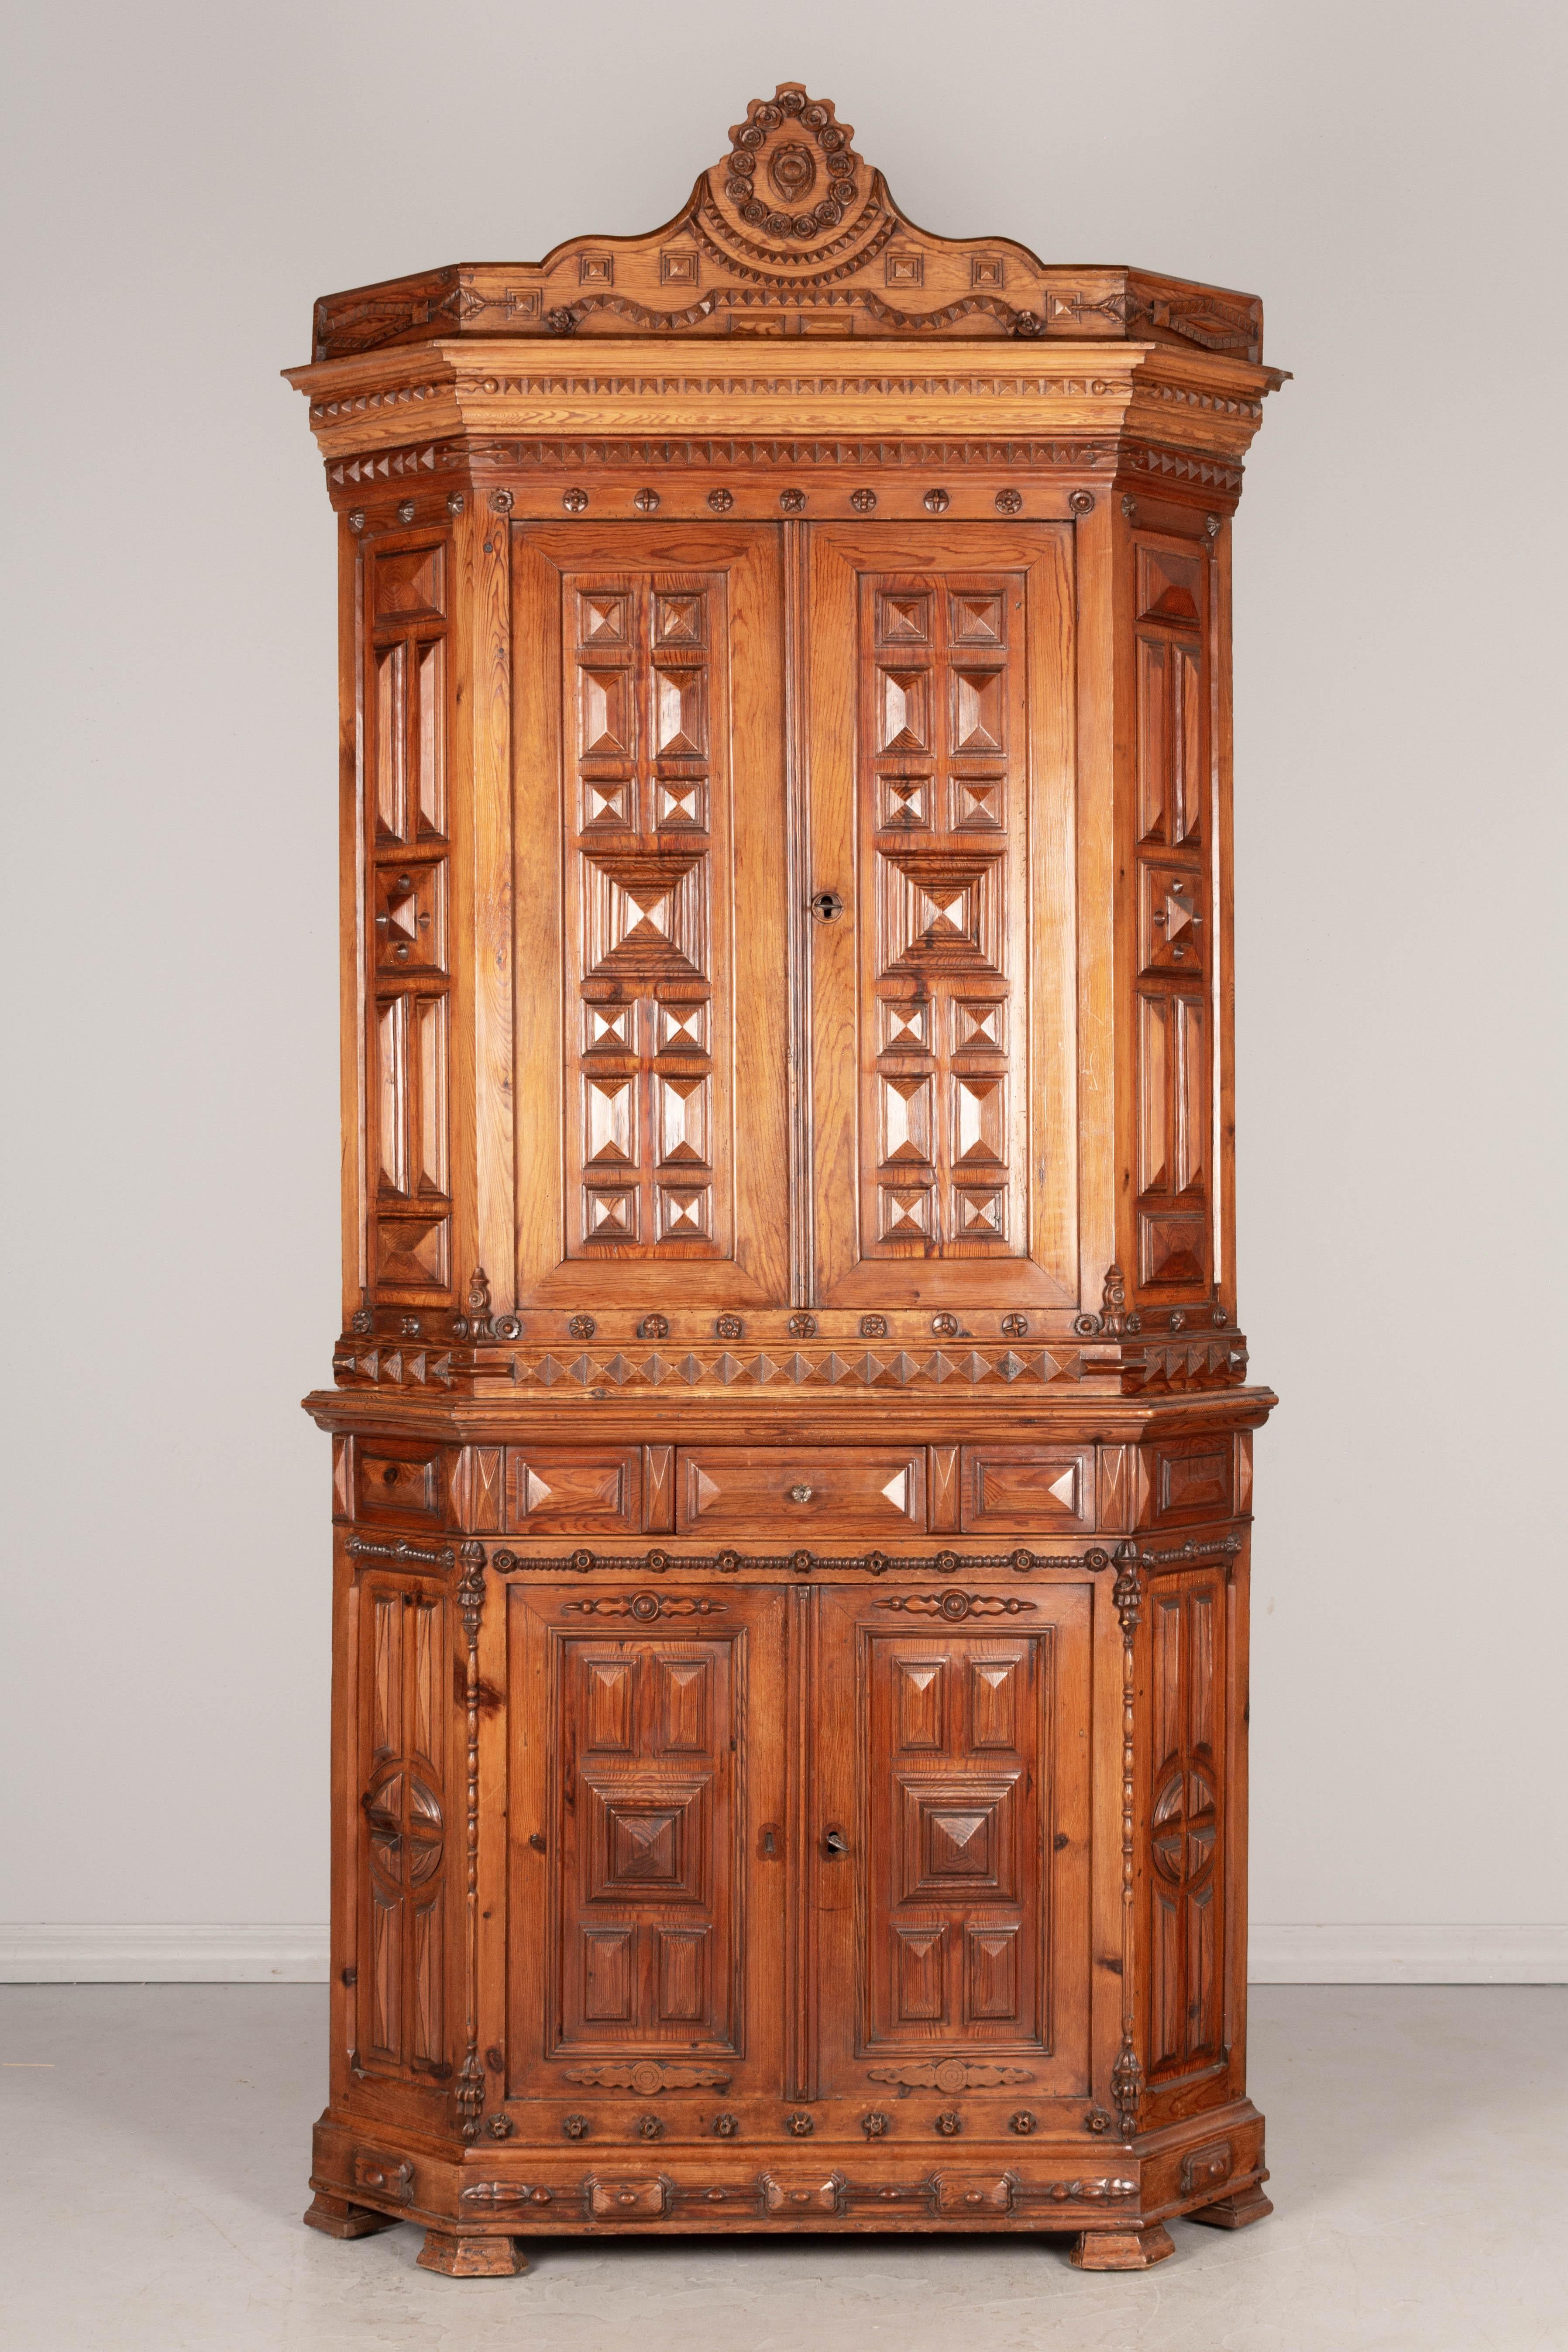 A fine 19th century French Art Populair, or Folk Art, corner cabinet from Normandy. Made of pitch pine with bold geometric carved panels. In three parts: the bottom has a small dovetailed drawer and one interior shelf, the top cabinet has two